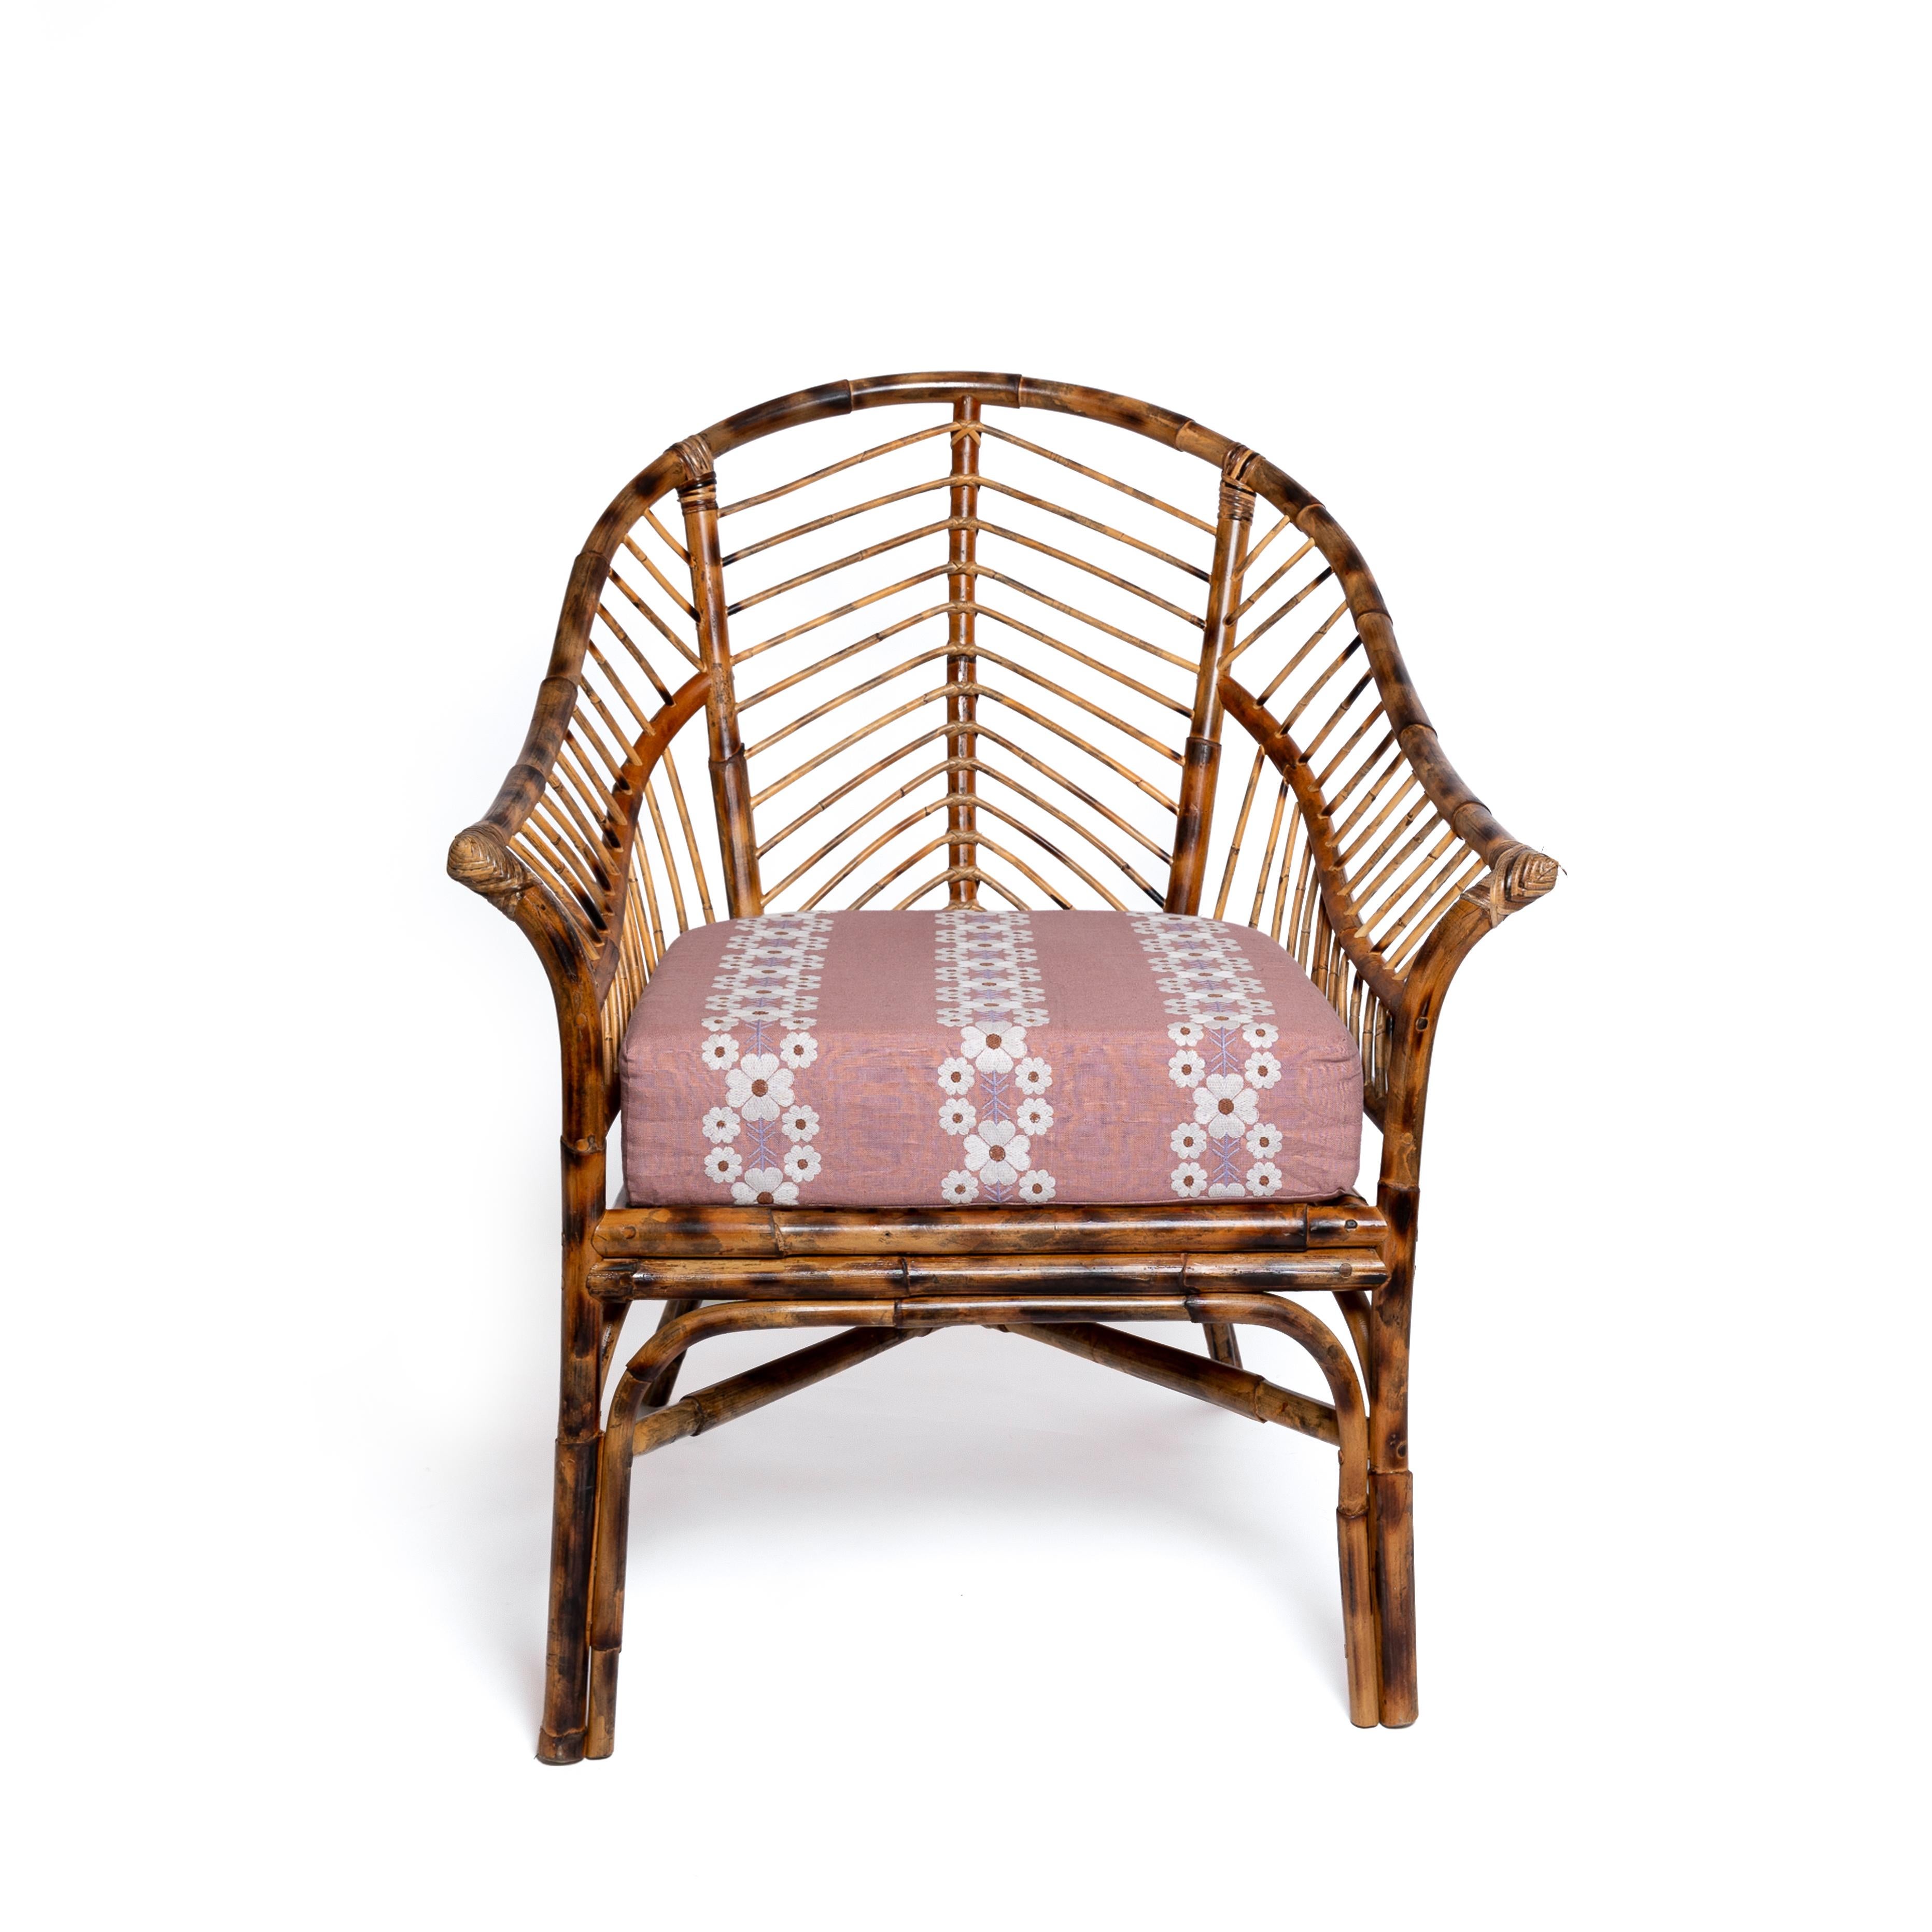 Indonesian Bamboo Chair in Natural Honey Rattan, Pink Cushion, Modern, by Louise Roe